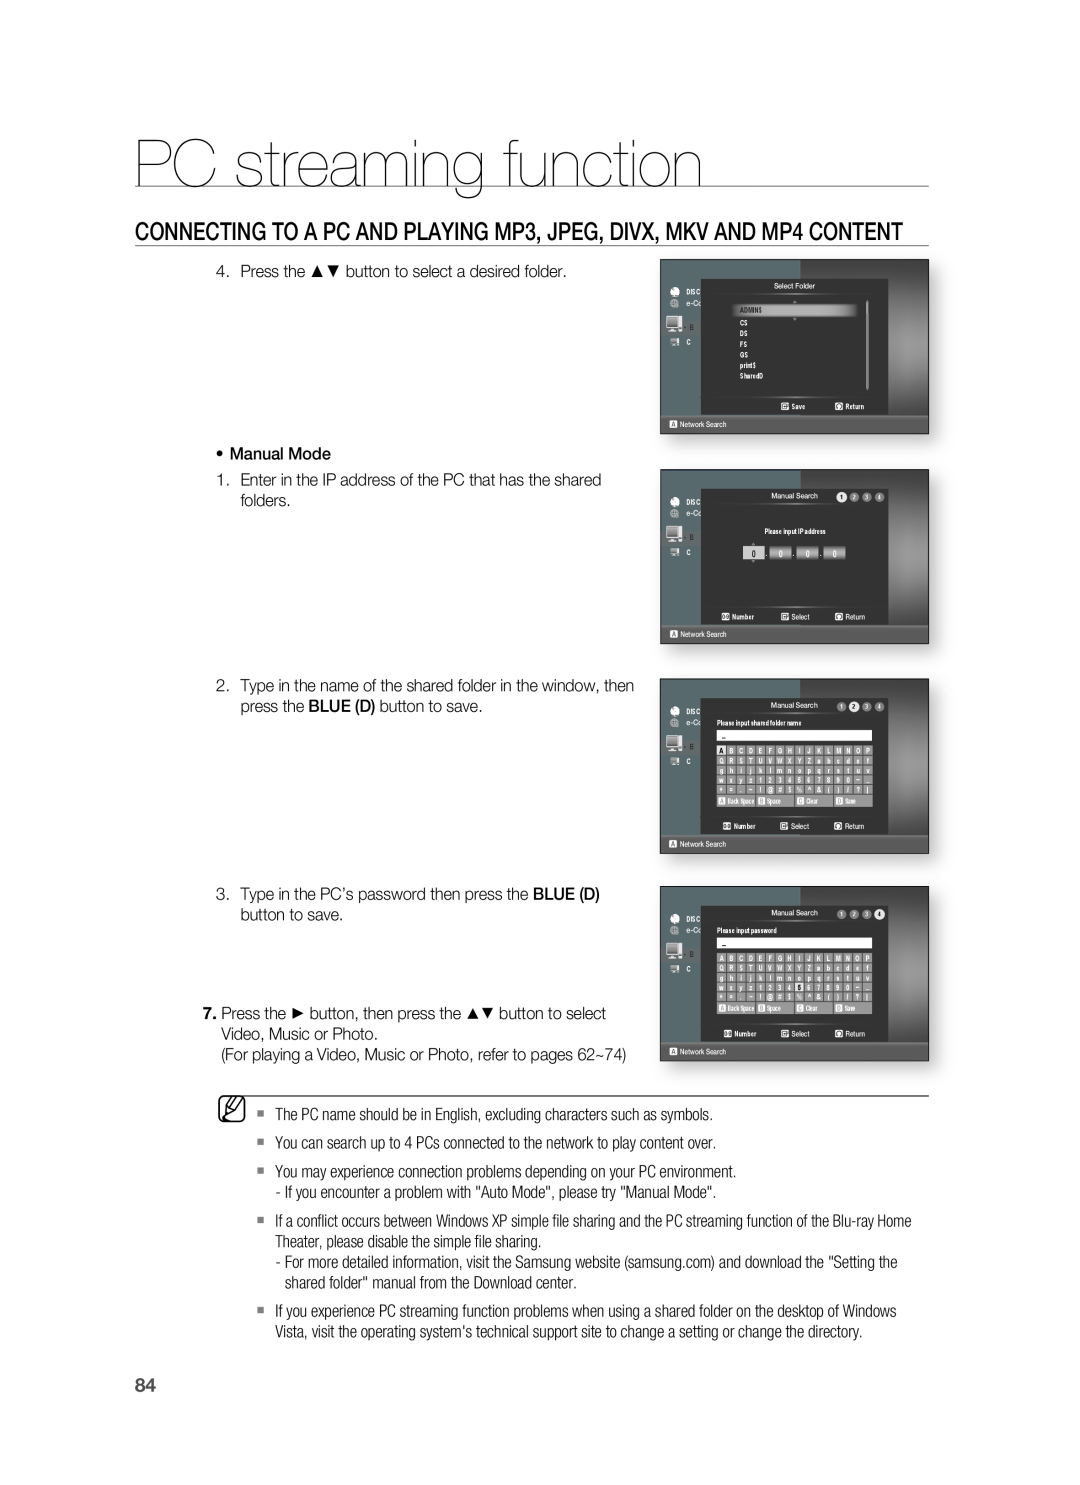 Samsung HT-BD3252 user manual PC streaming function, Press the button to select a desired folder 